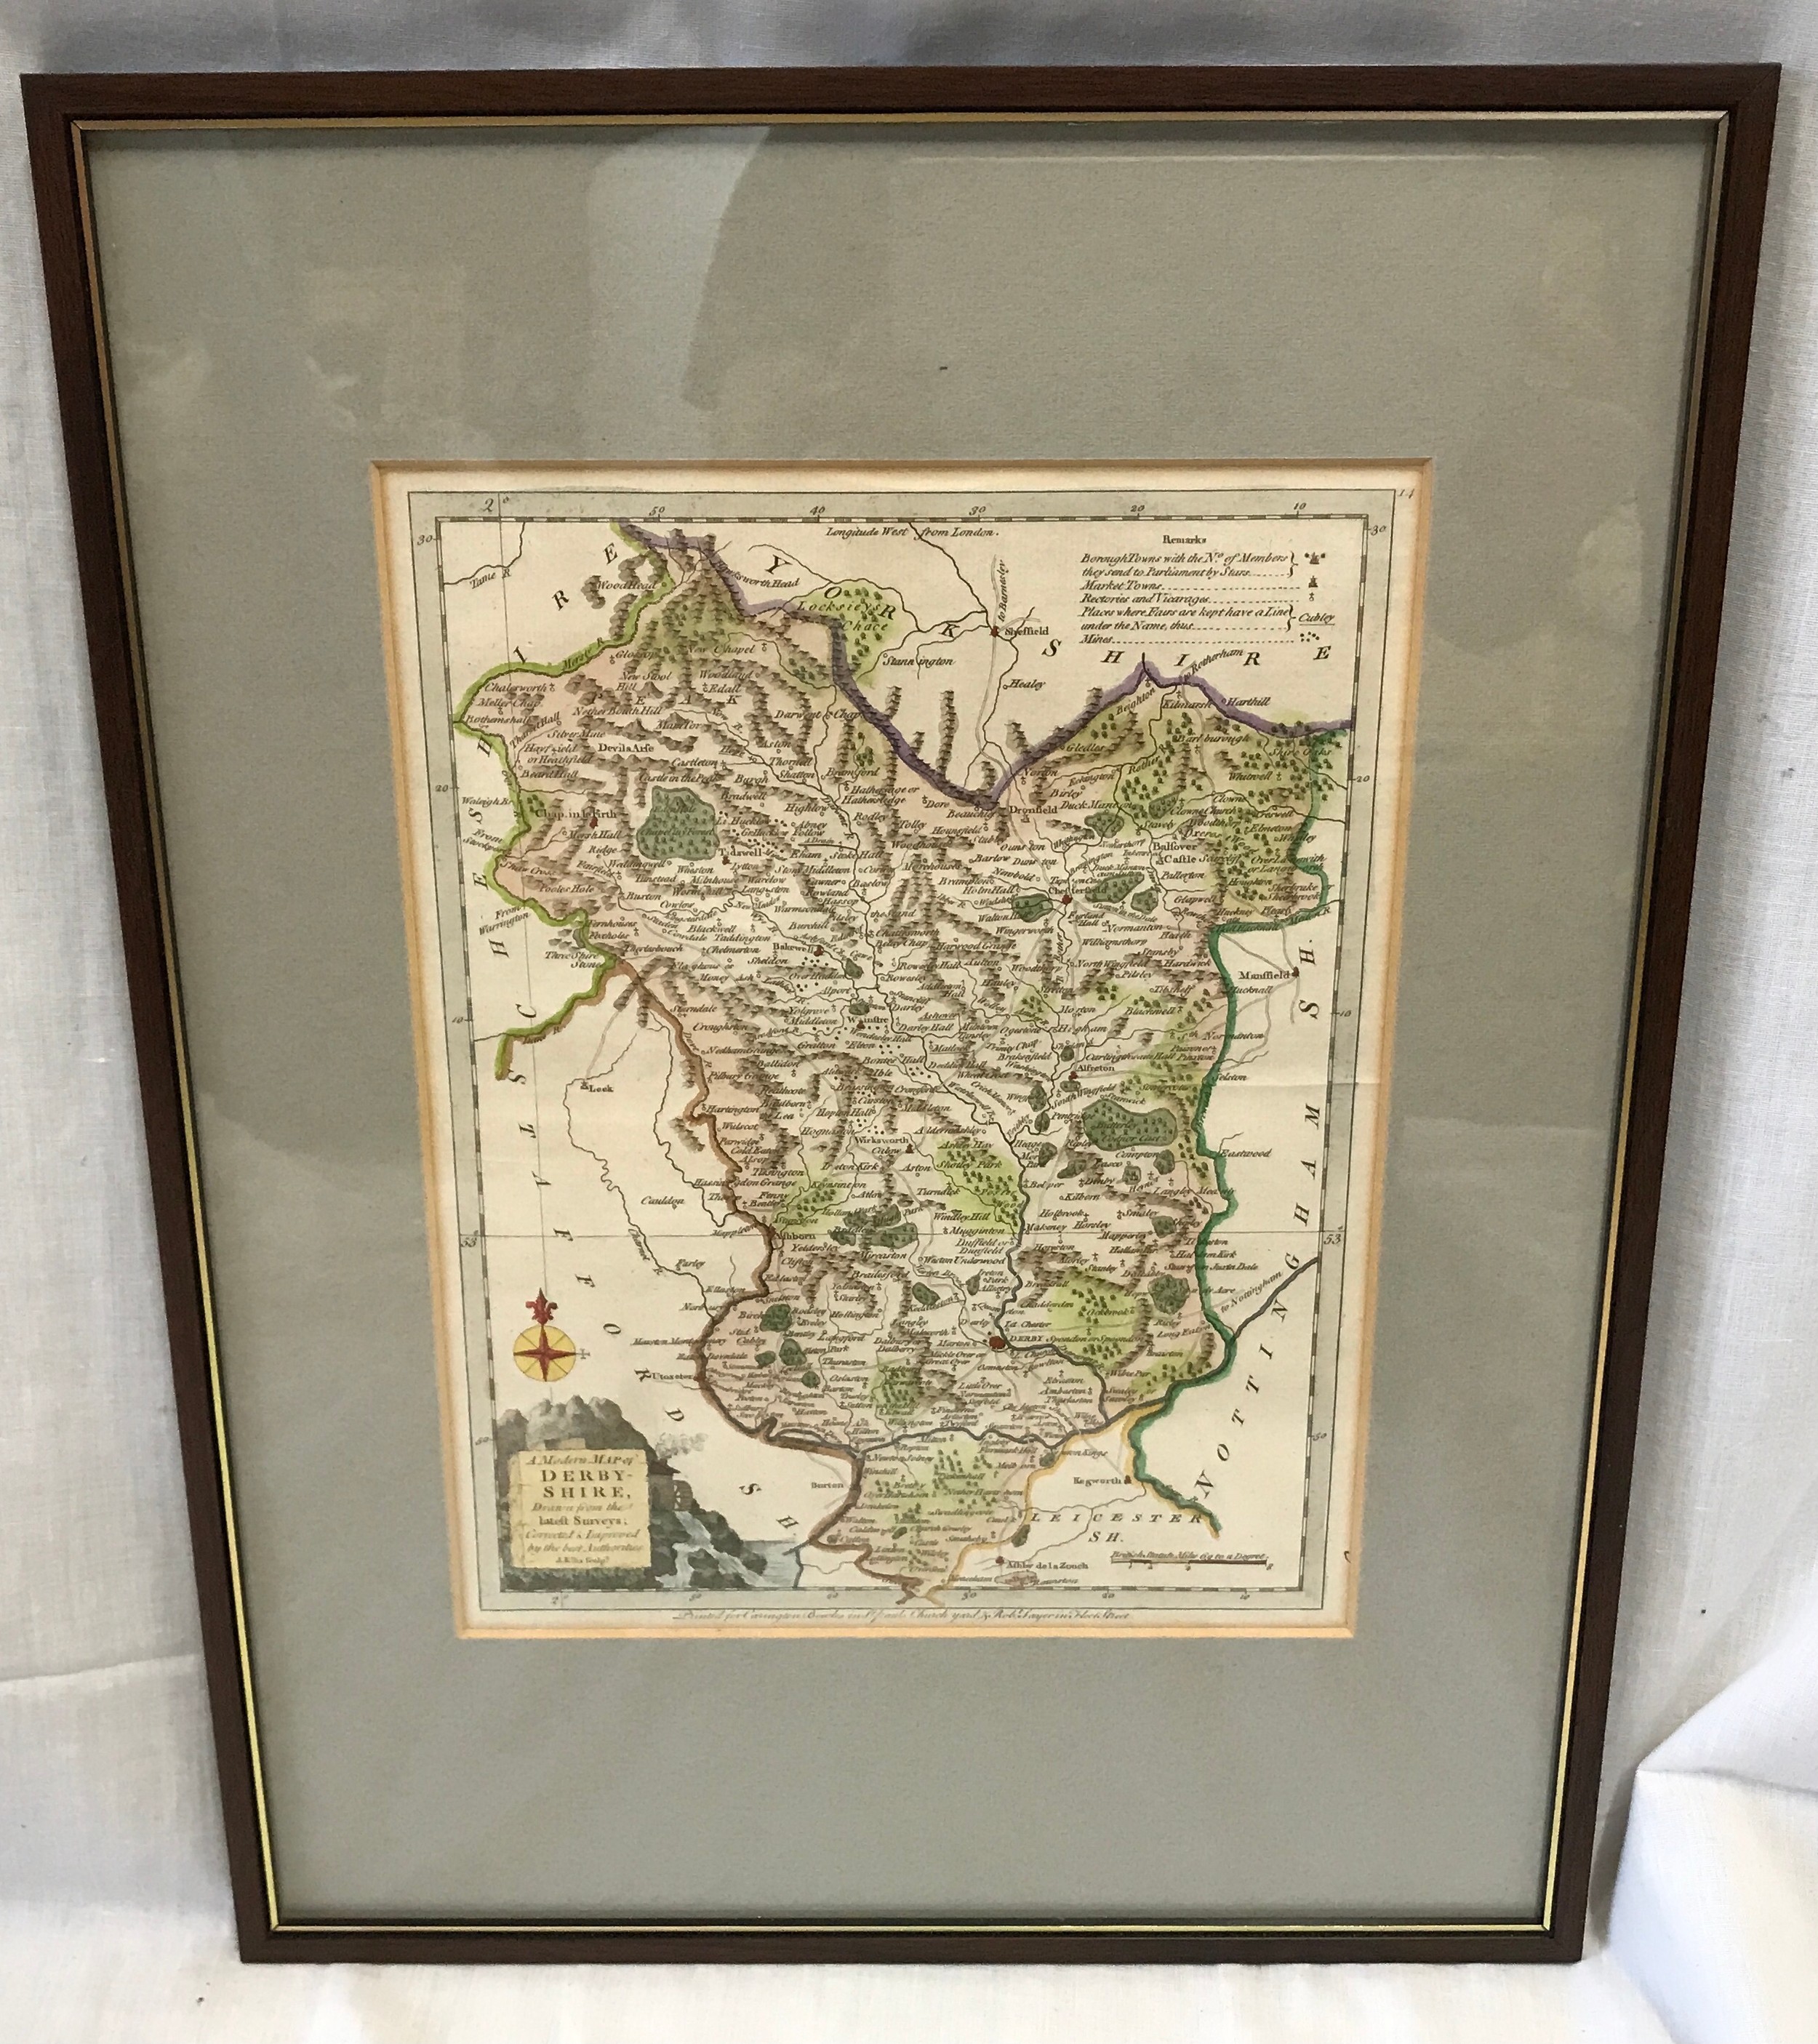 A small framed coloured map of Derbyshire printed for Carrington Bowles and St Pauls Churchyard.